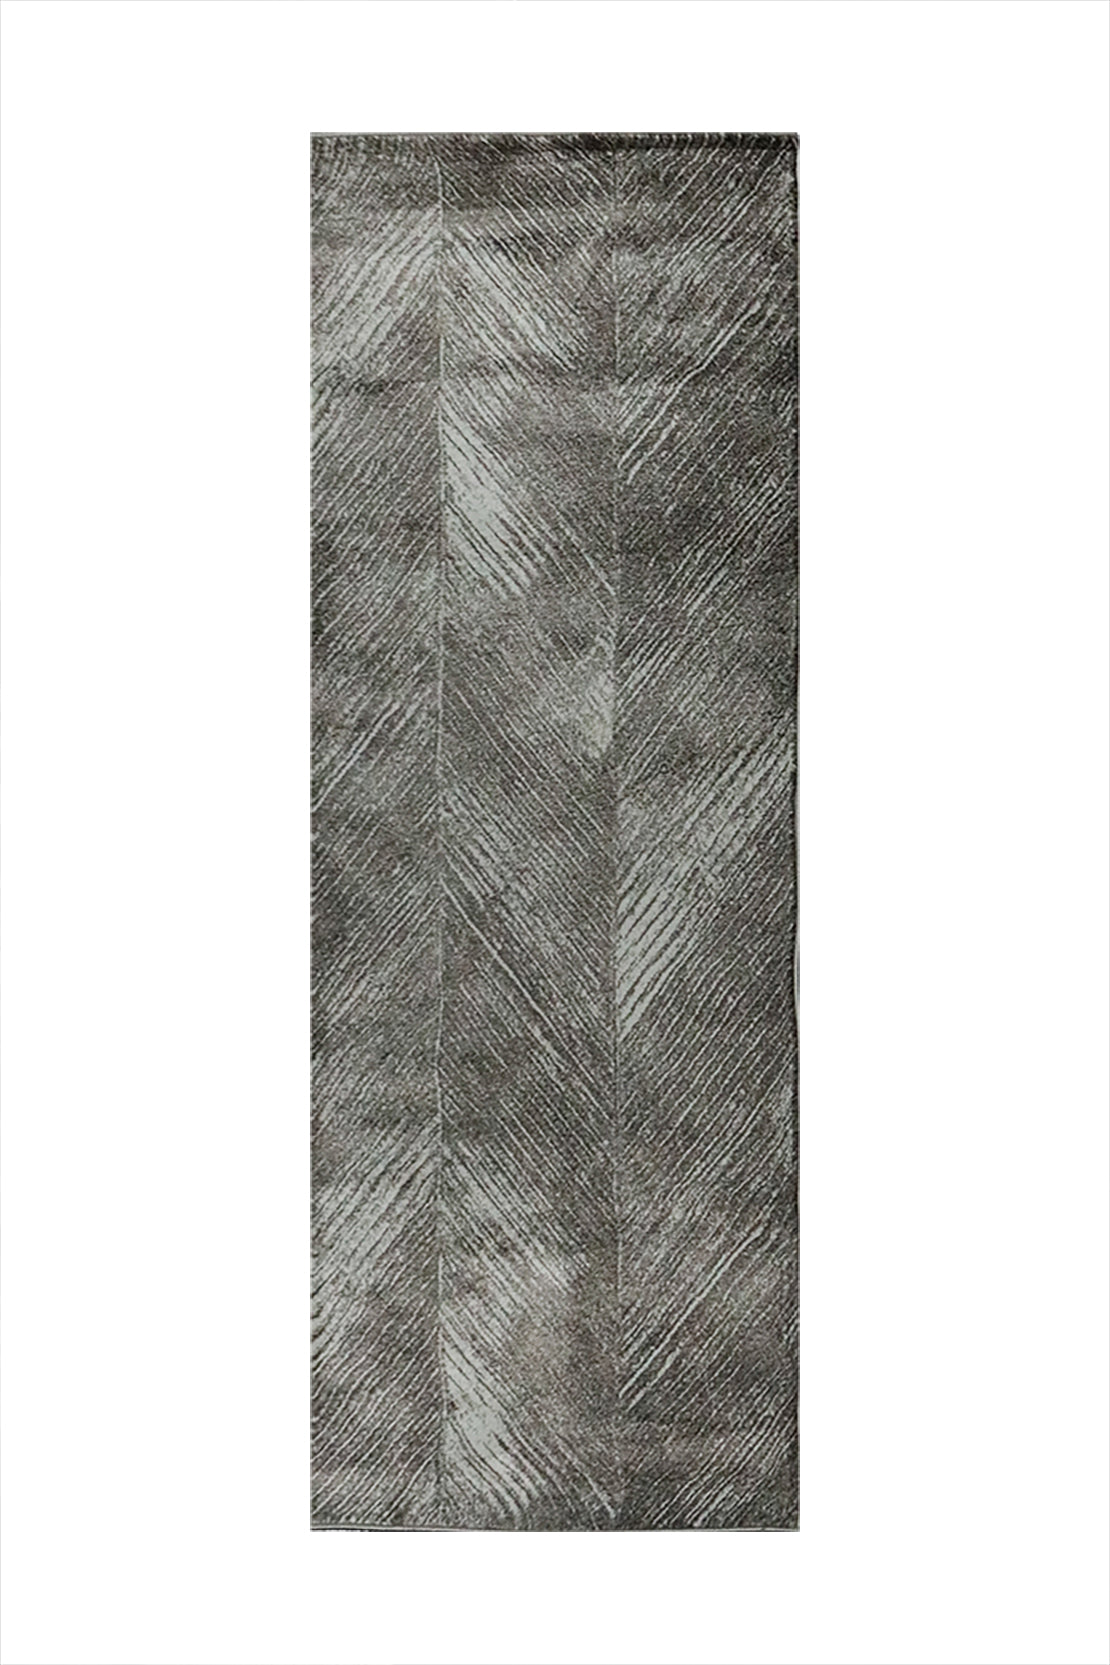 Turkish Modern Festival WD Rug - 3.1 x 8.0 FT - Brown - Sleek and Minimalist for Chic Interiors